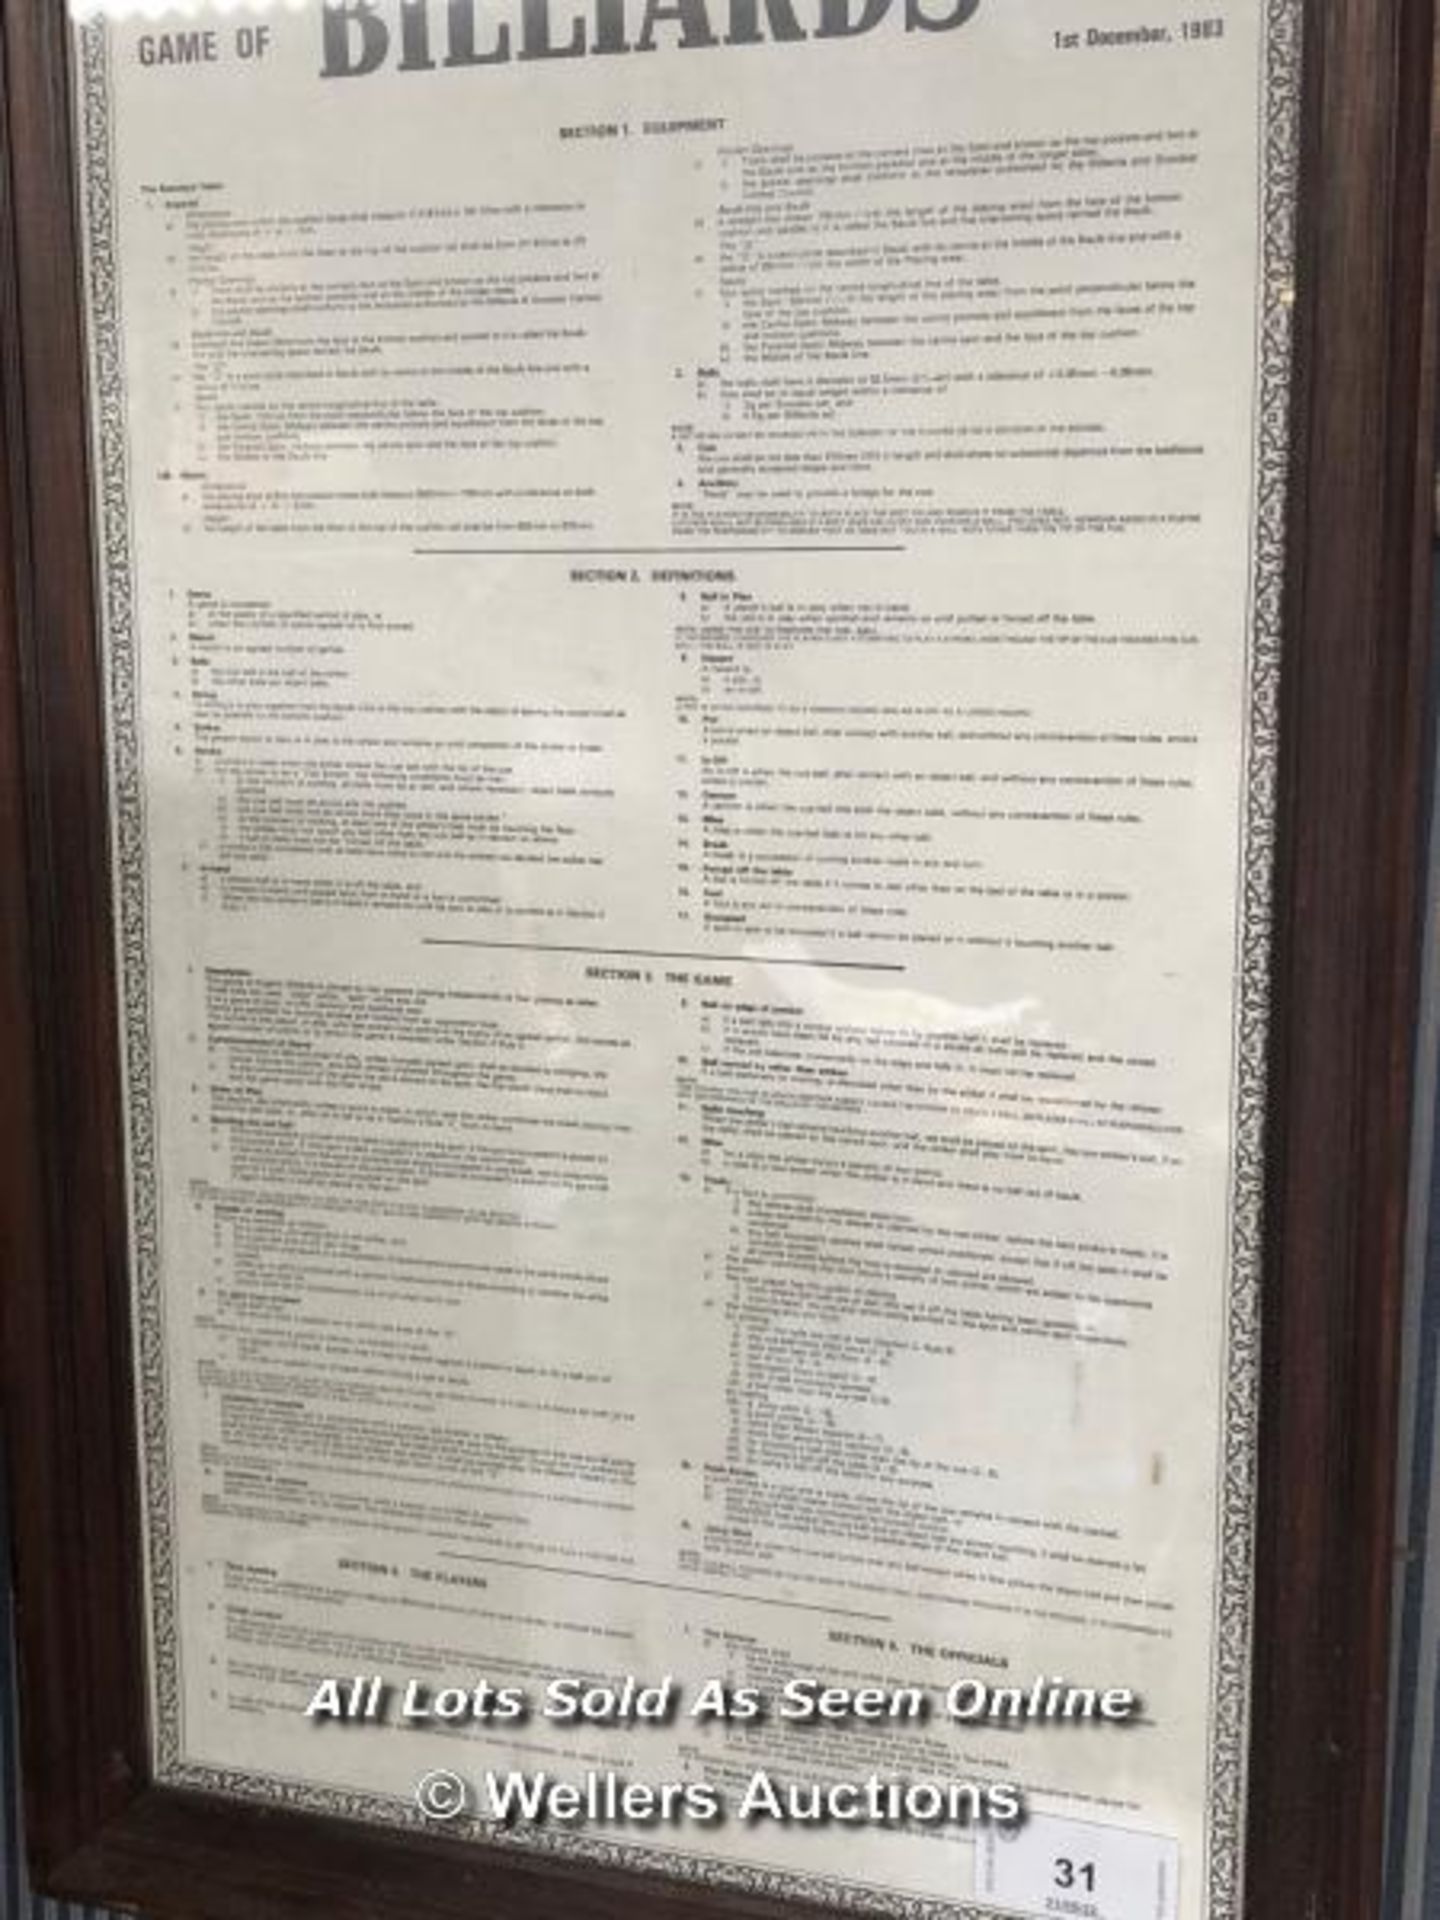 "THE RULES OF THE GAME OF ENGLISH BILLIARDS" FRAMED RULES IN HANGING PICTURE FRAME, AUTHORISED BY - Image 3 of 4